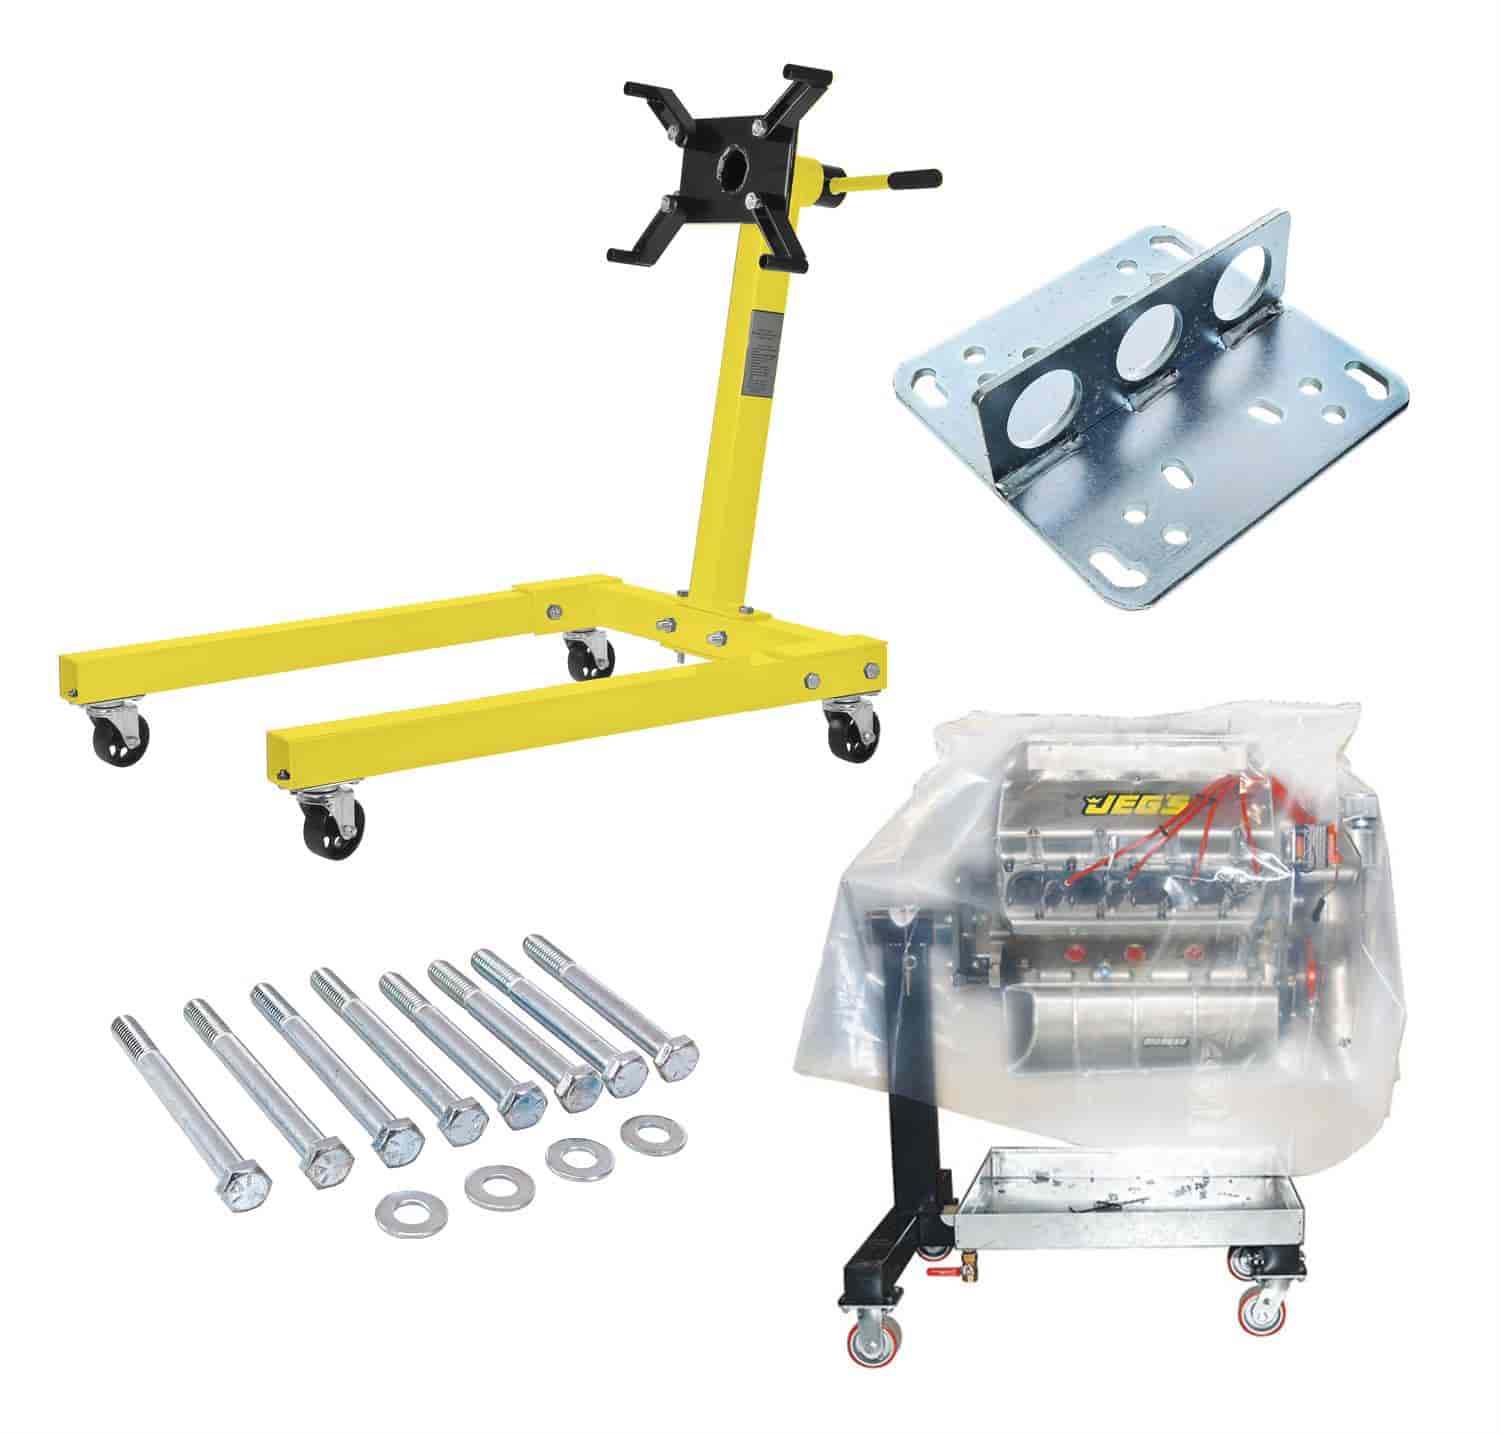 JEGS 80041K1: Engine Stand Kit [1250 lb. Capacity] - JEGS